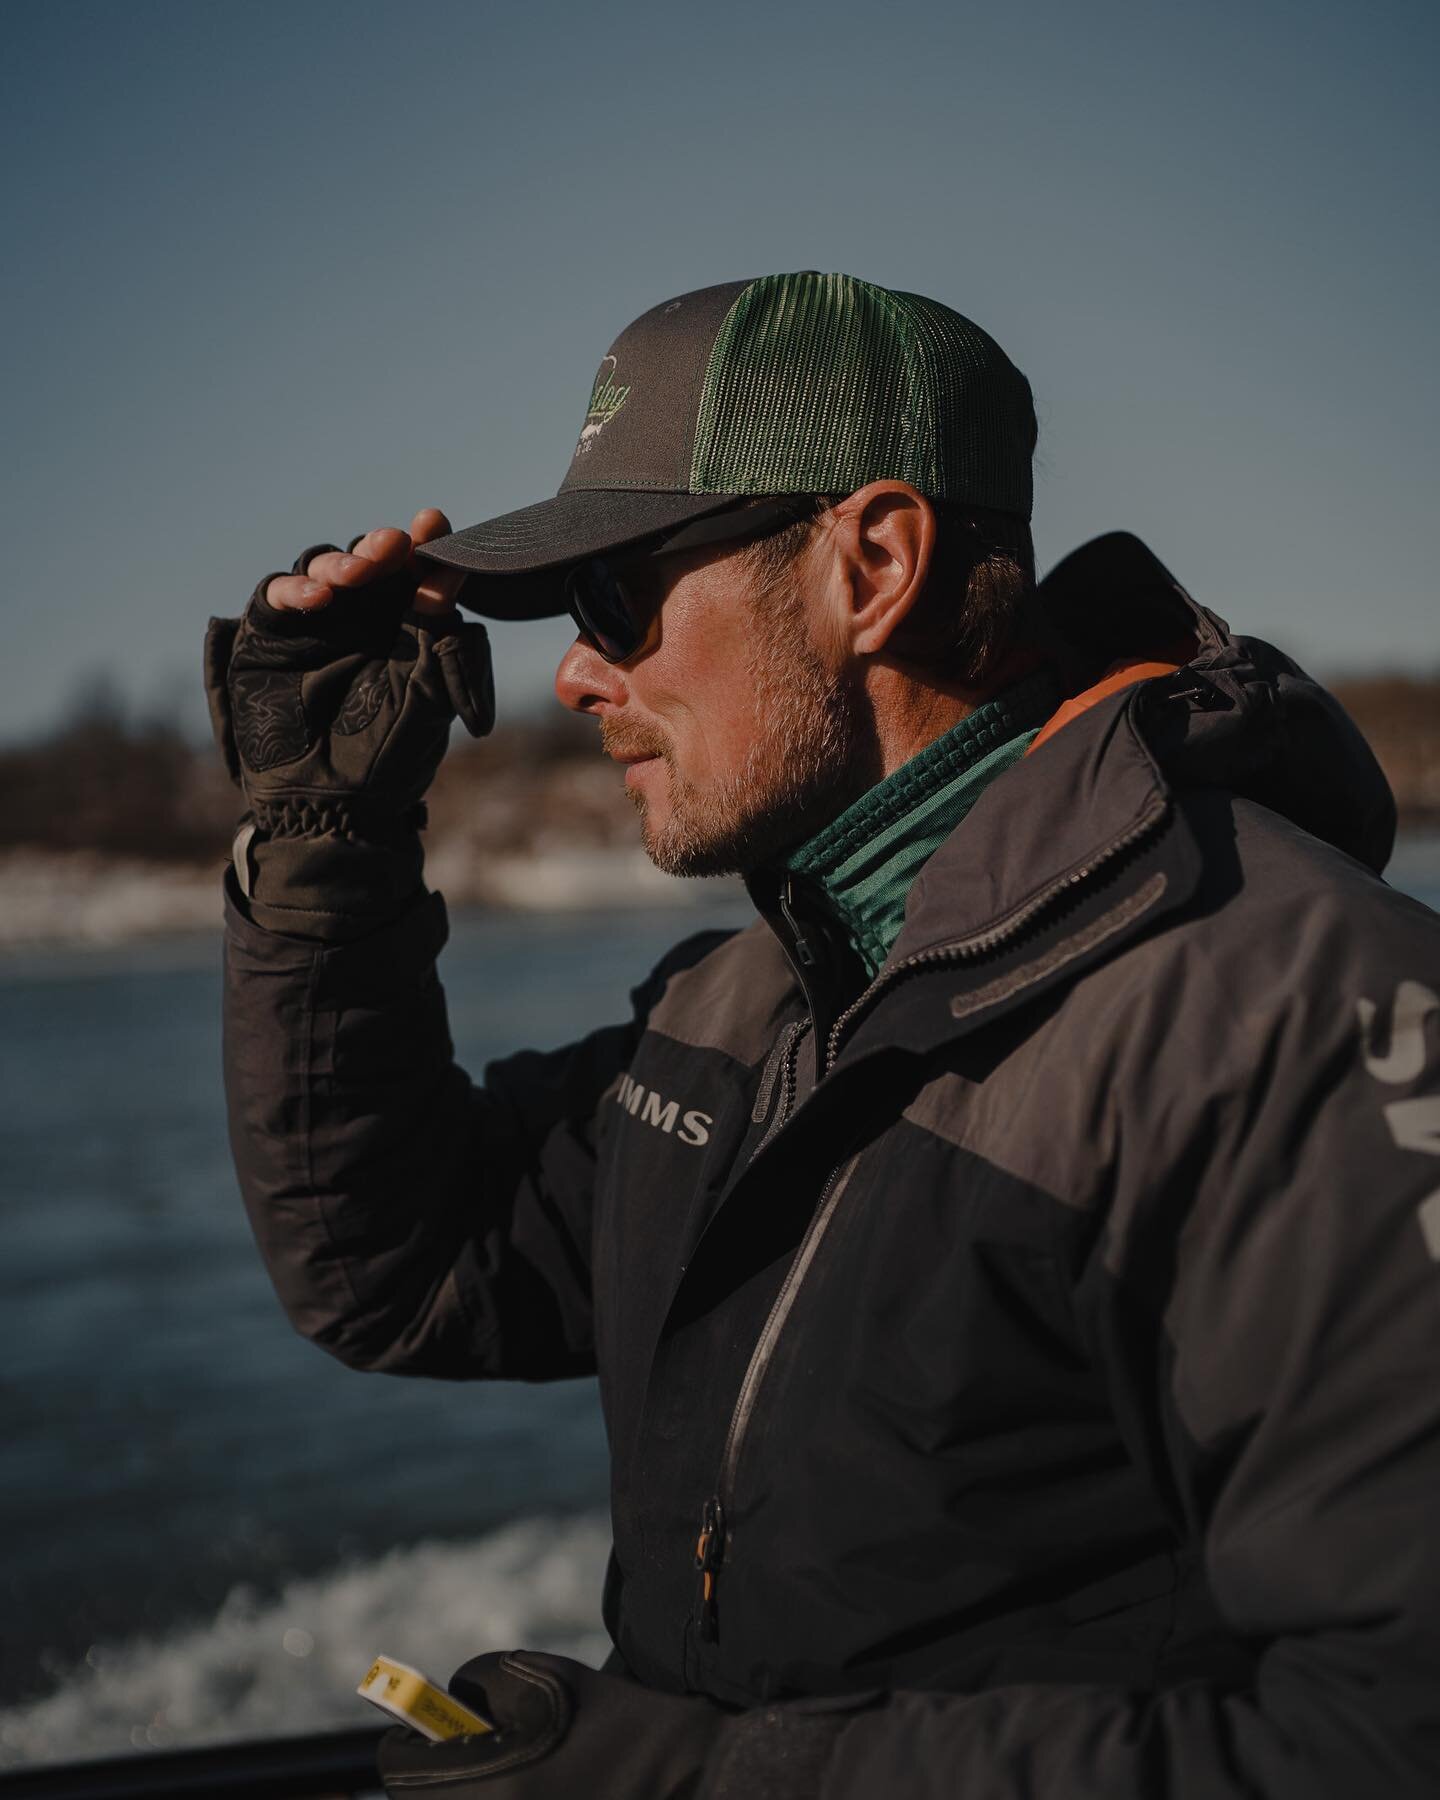 i tagged along with @brookdogfly to grab some photos and help share what a guided fishing trip on the lower Niagara is all about. i&rsquo;ll be sharing some more images from this trip but first, i wanted a proper introduction to our guide. meet Ryan,